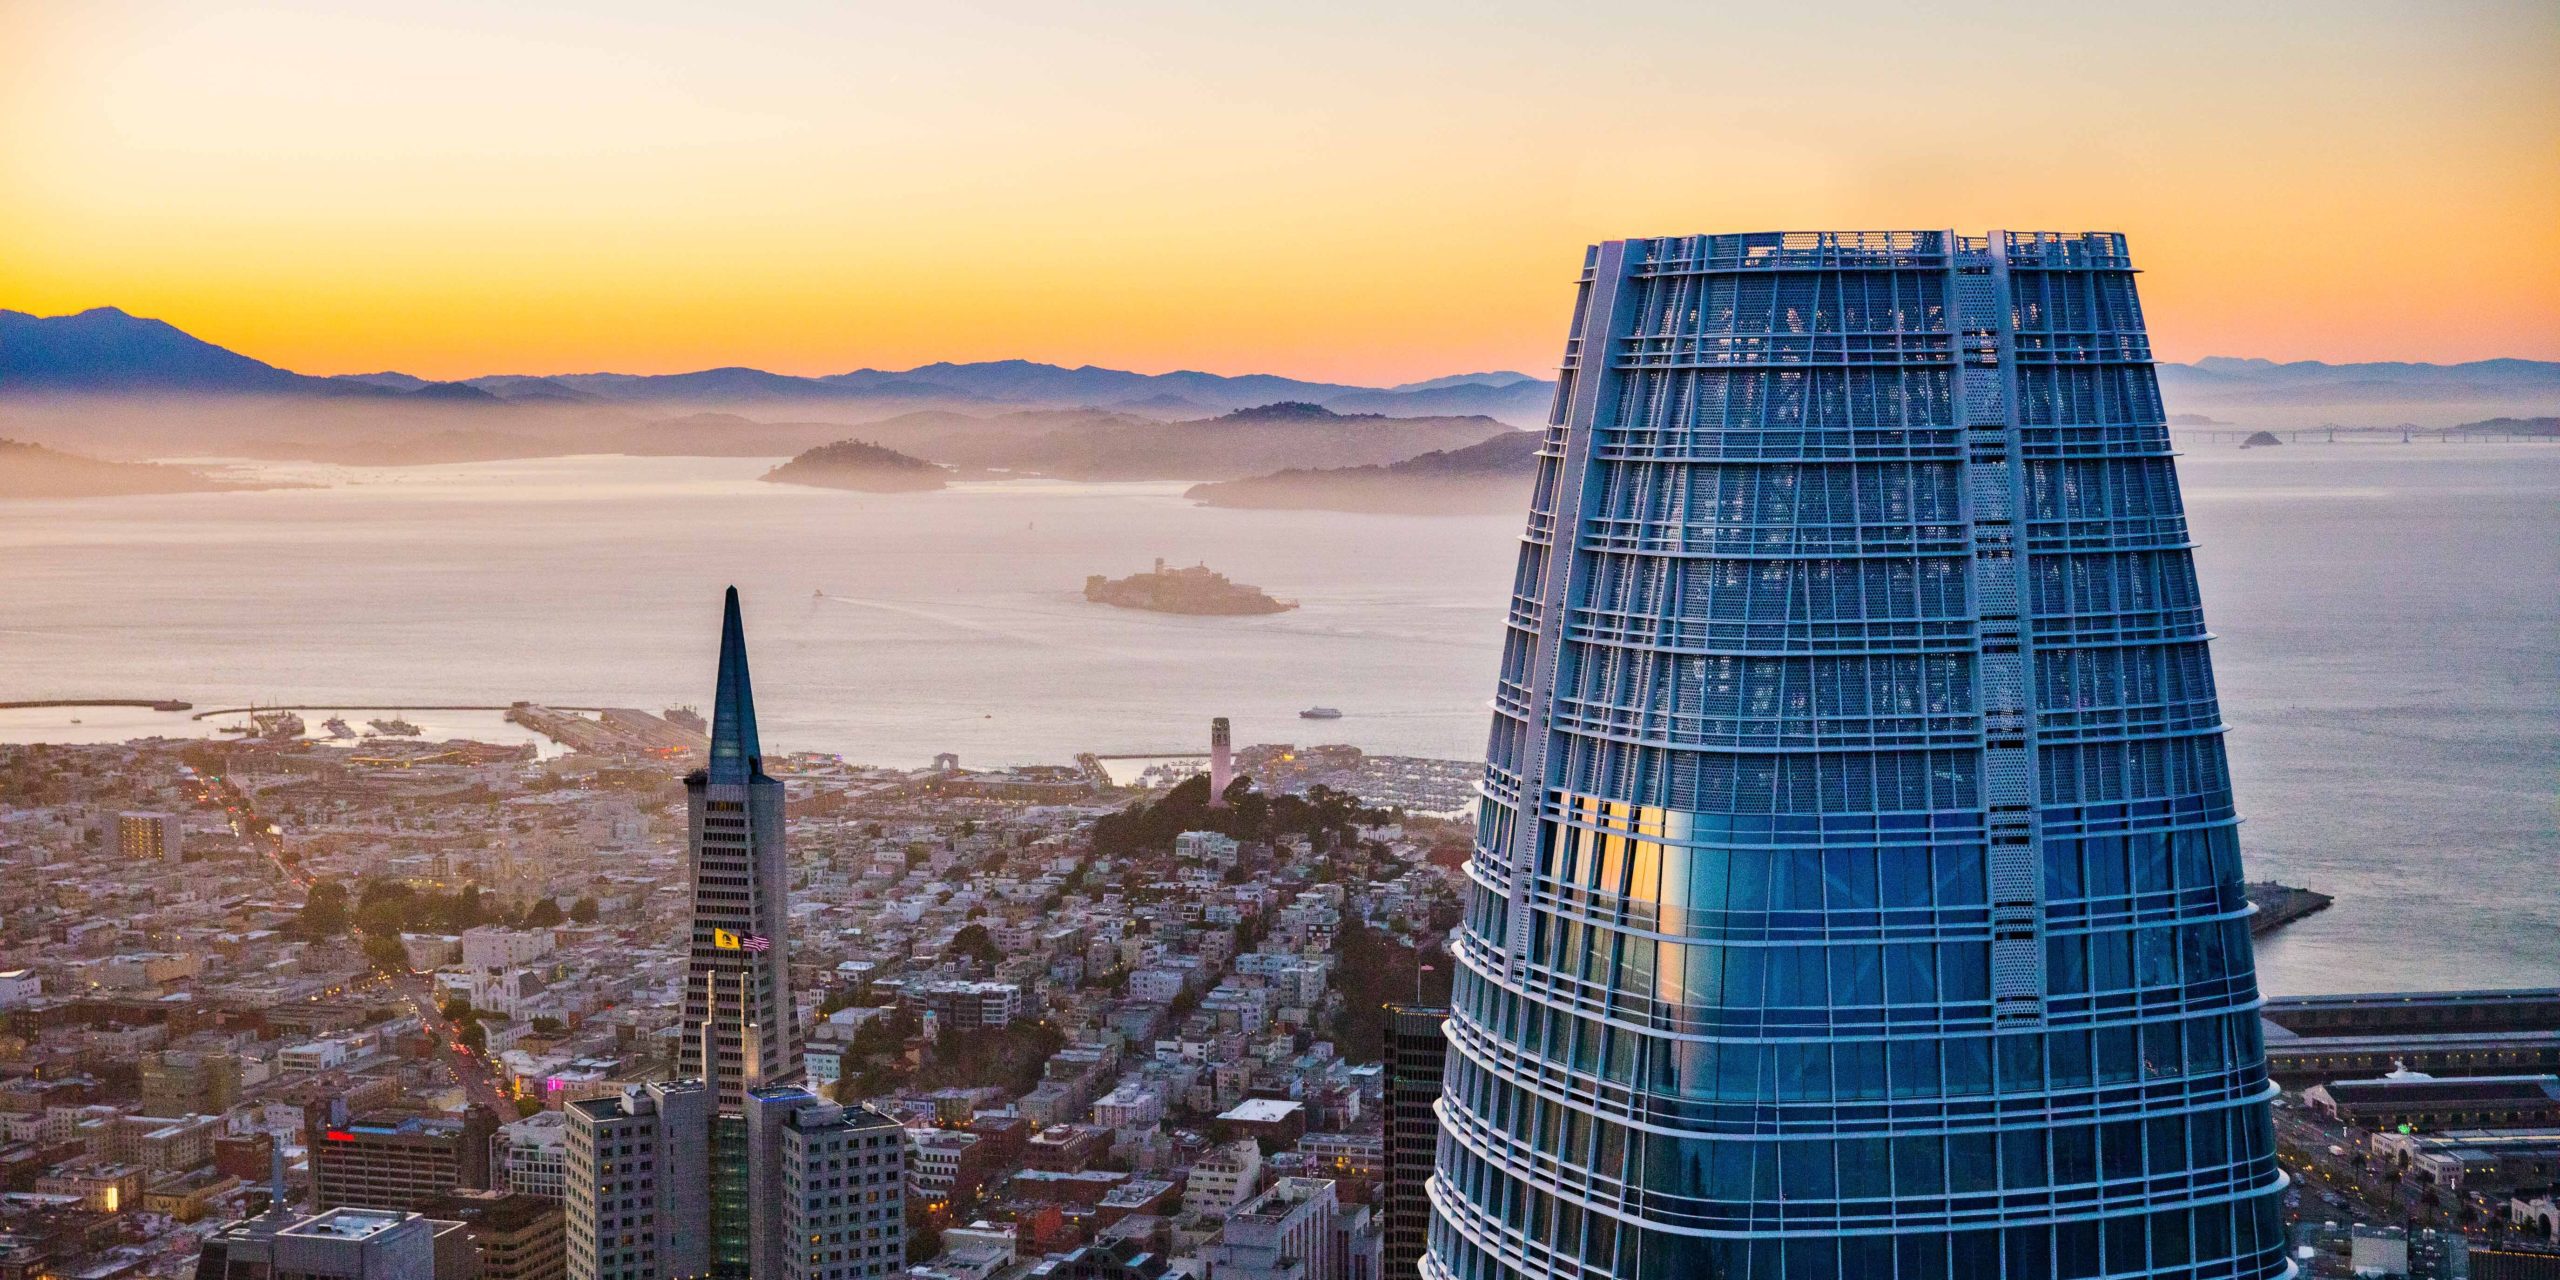 Salesforce Tower overlooking San Francisco at sunset.